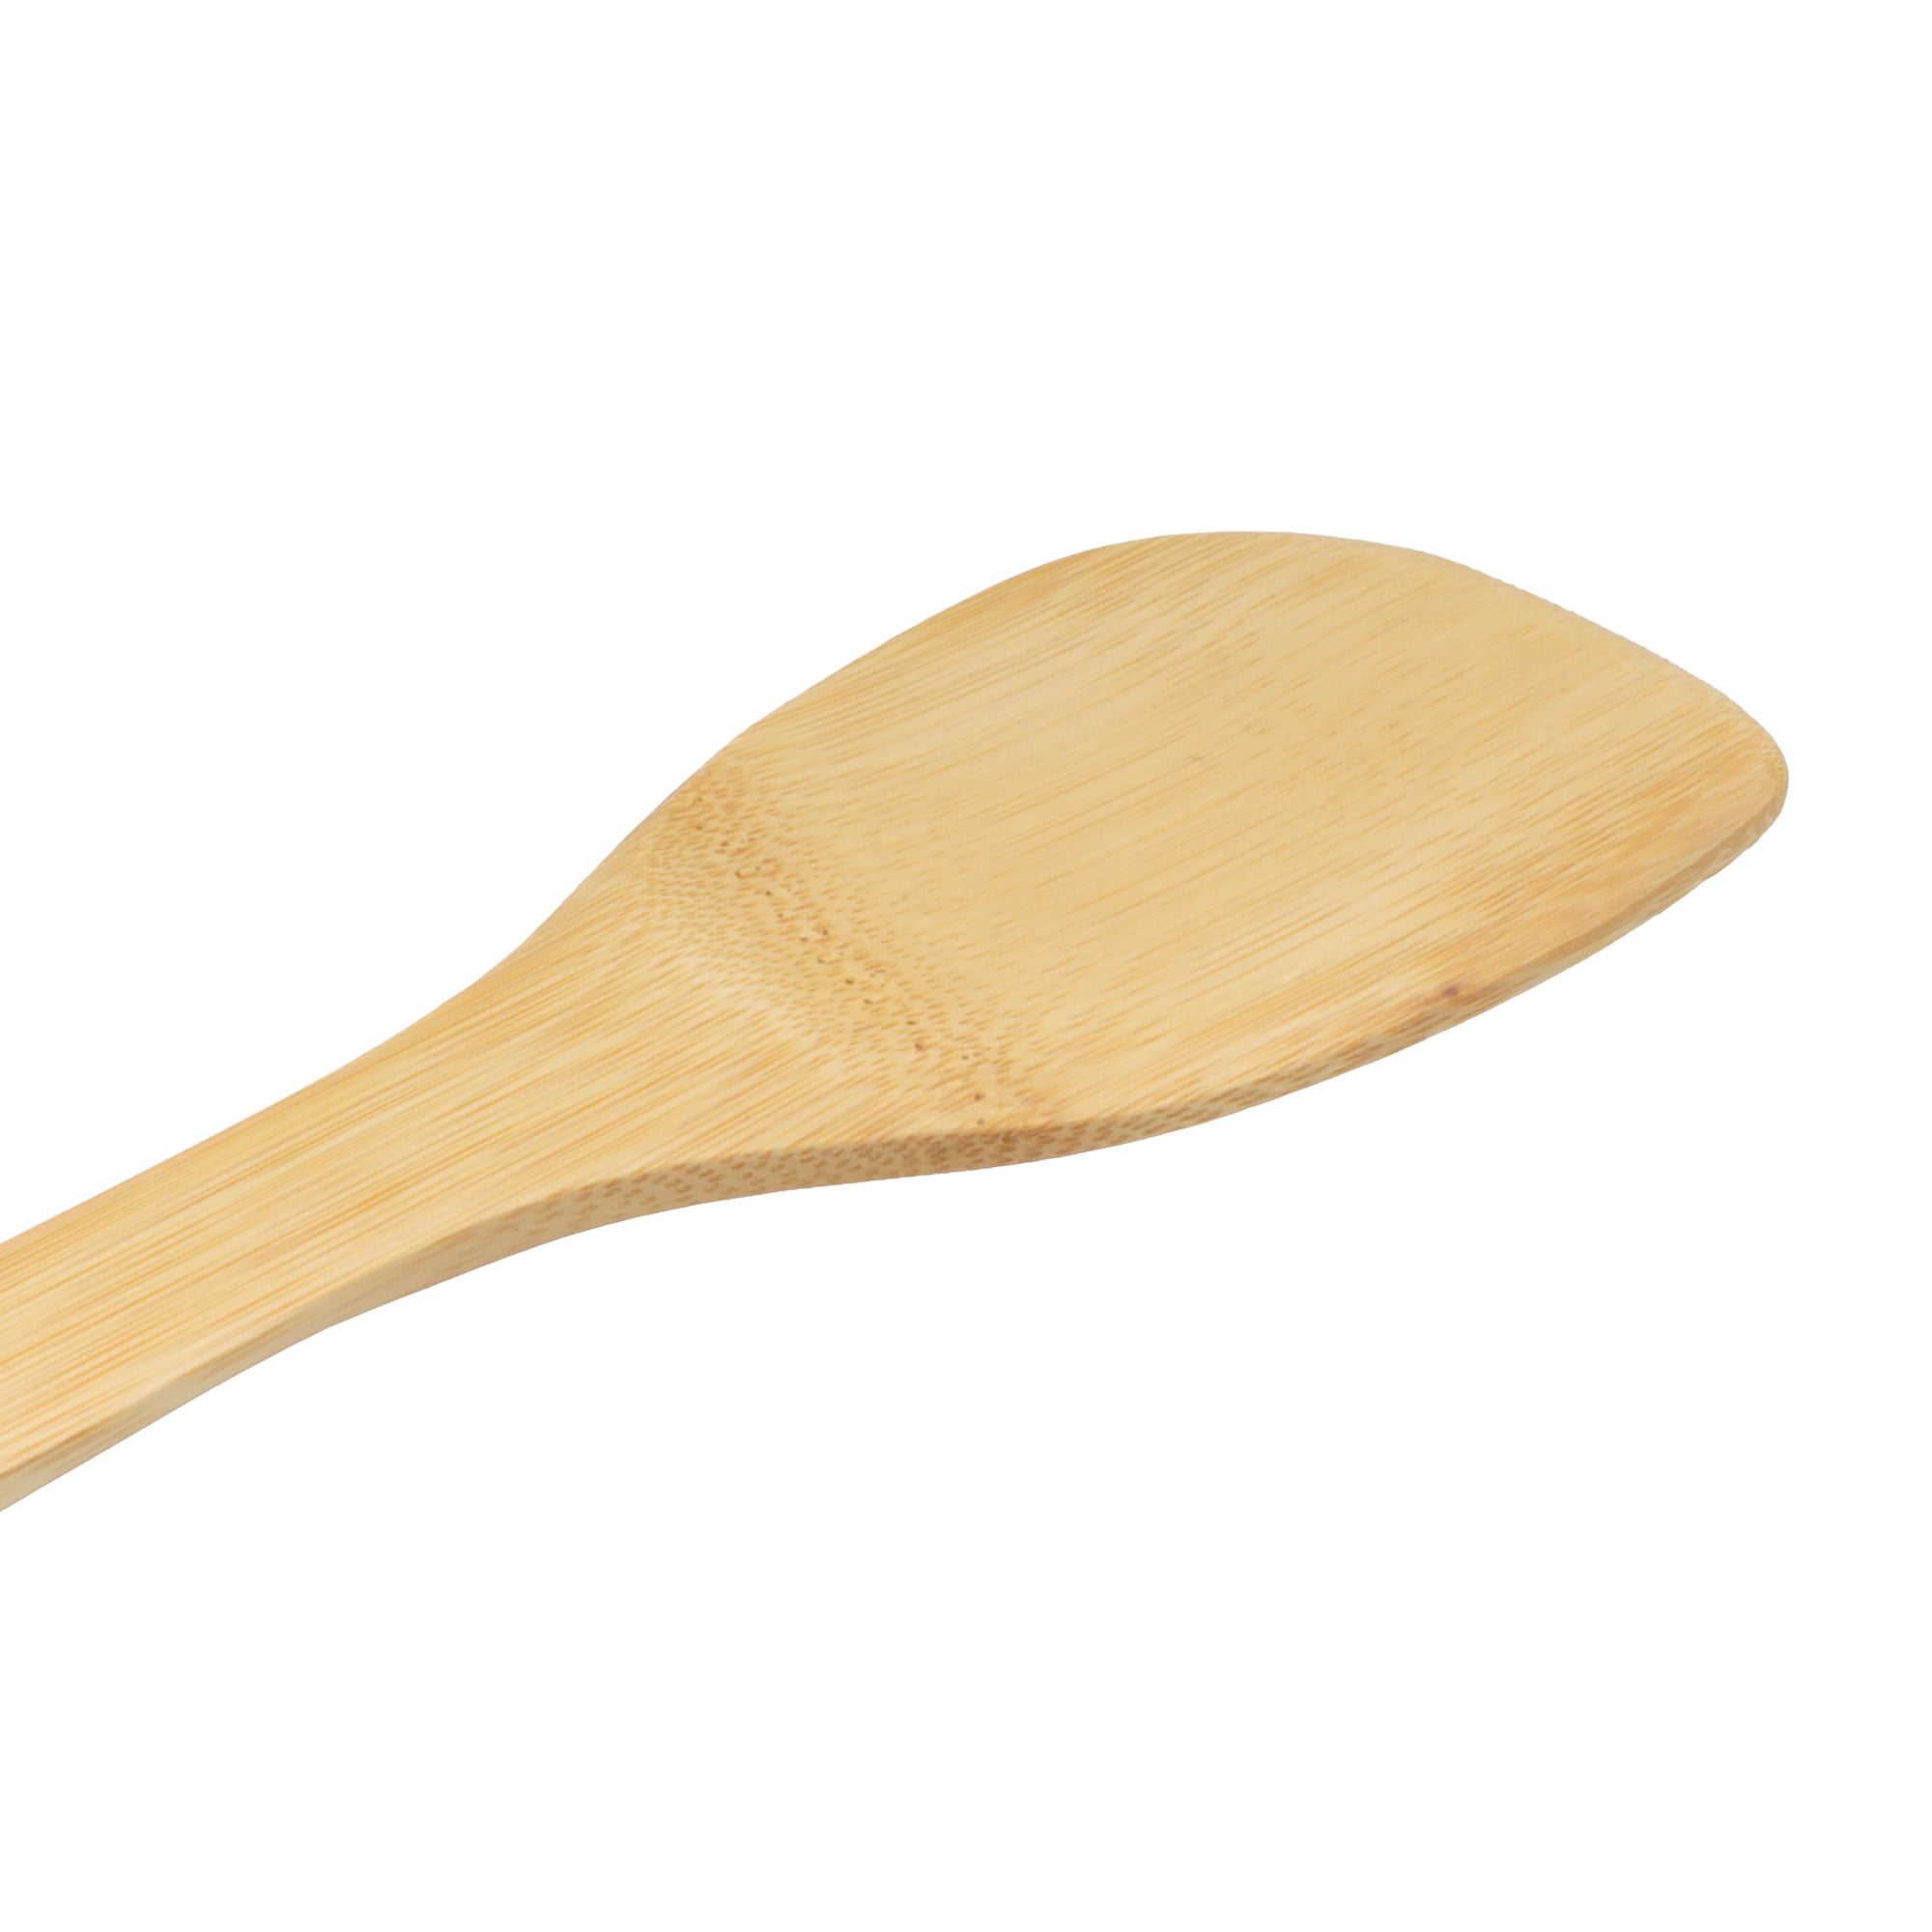 Curved Spatula/Paddle w/ Hole- Pack of 5 - Cooking and Serving Utensils -  Small Bamboo-ware